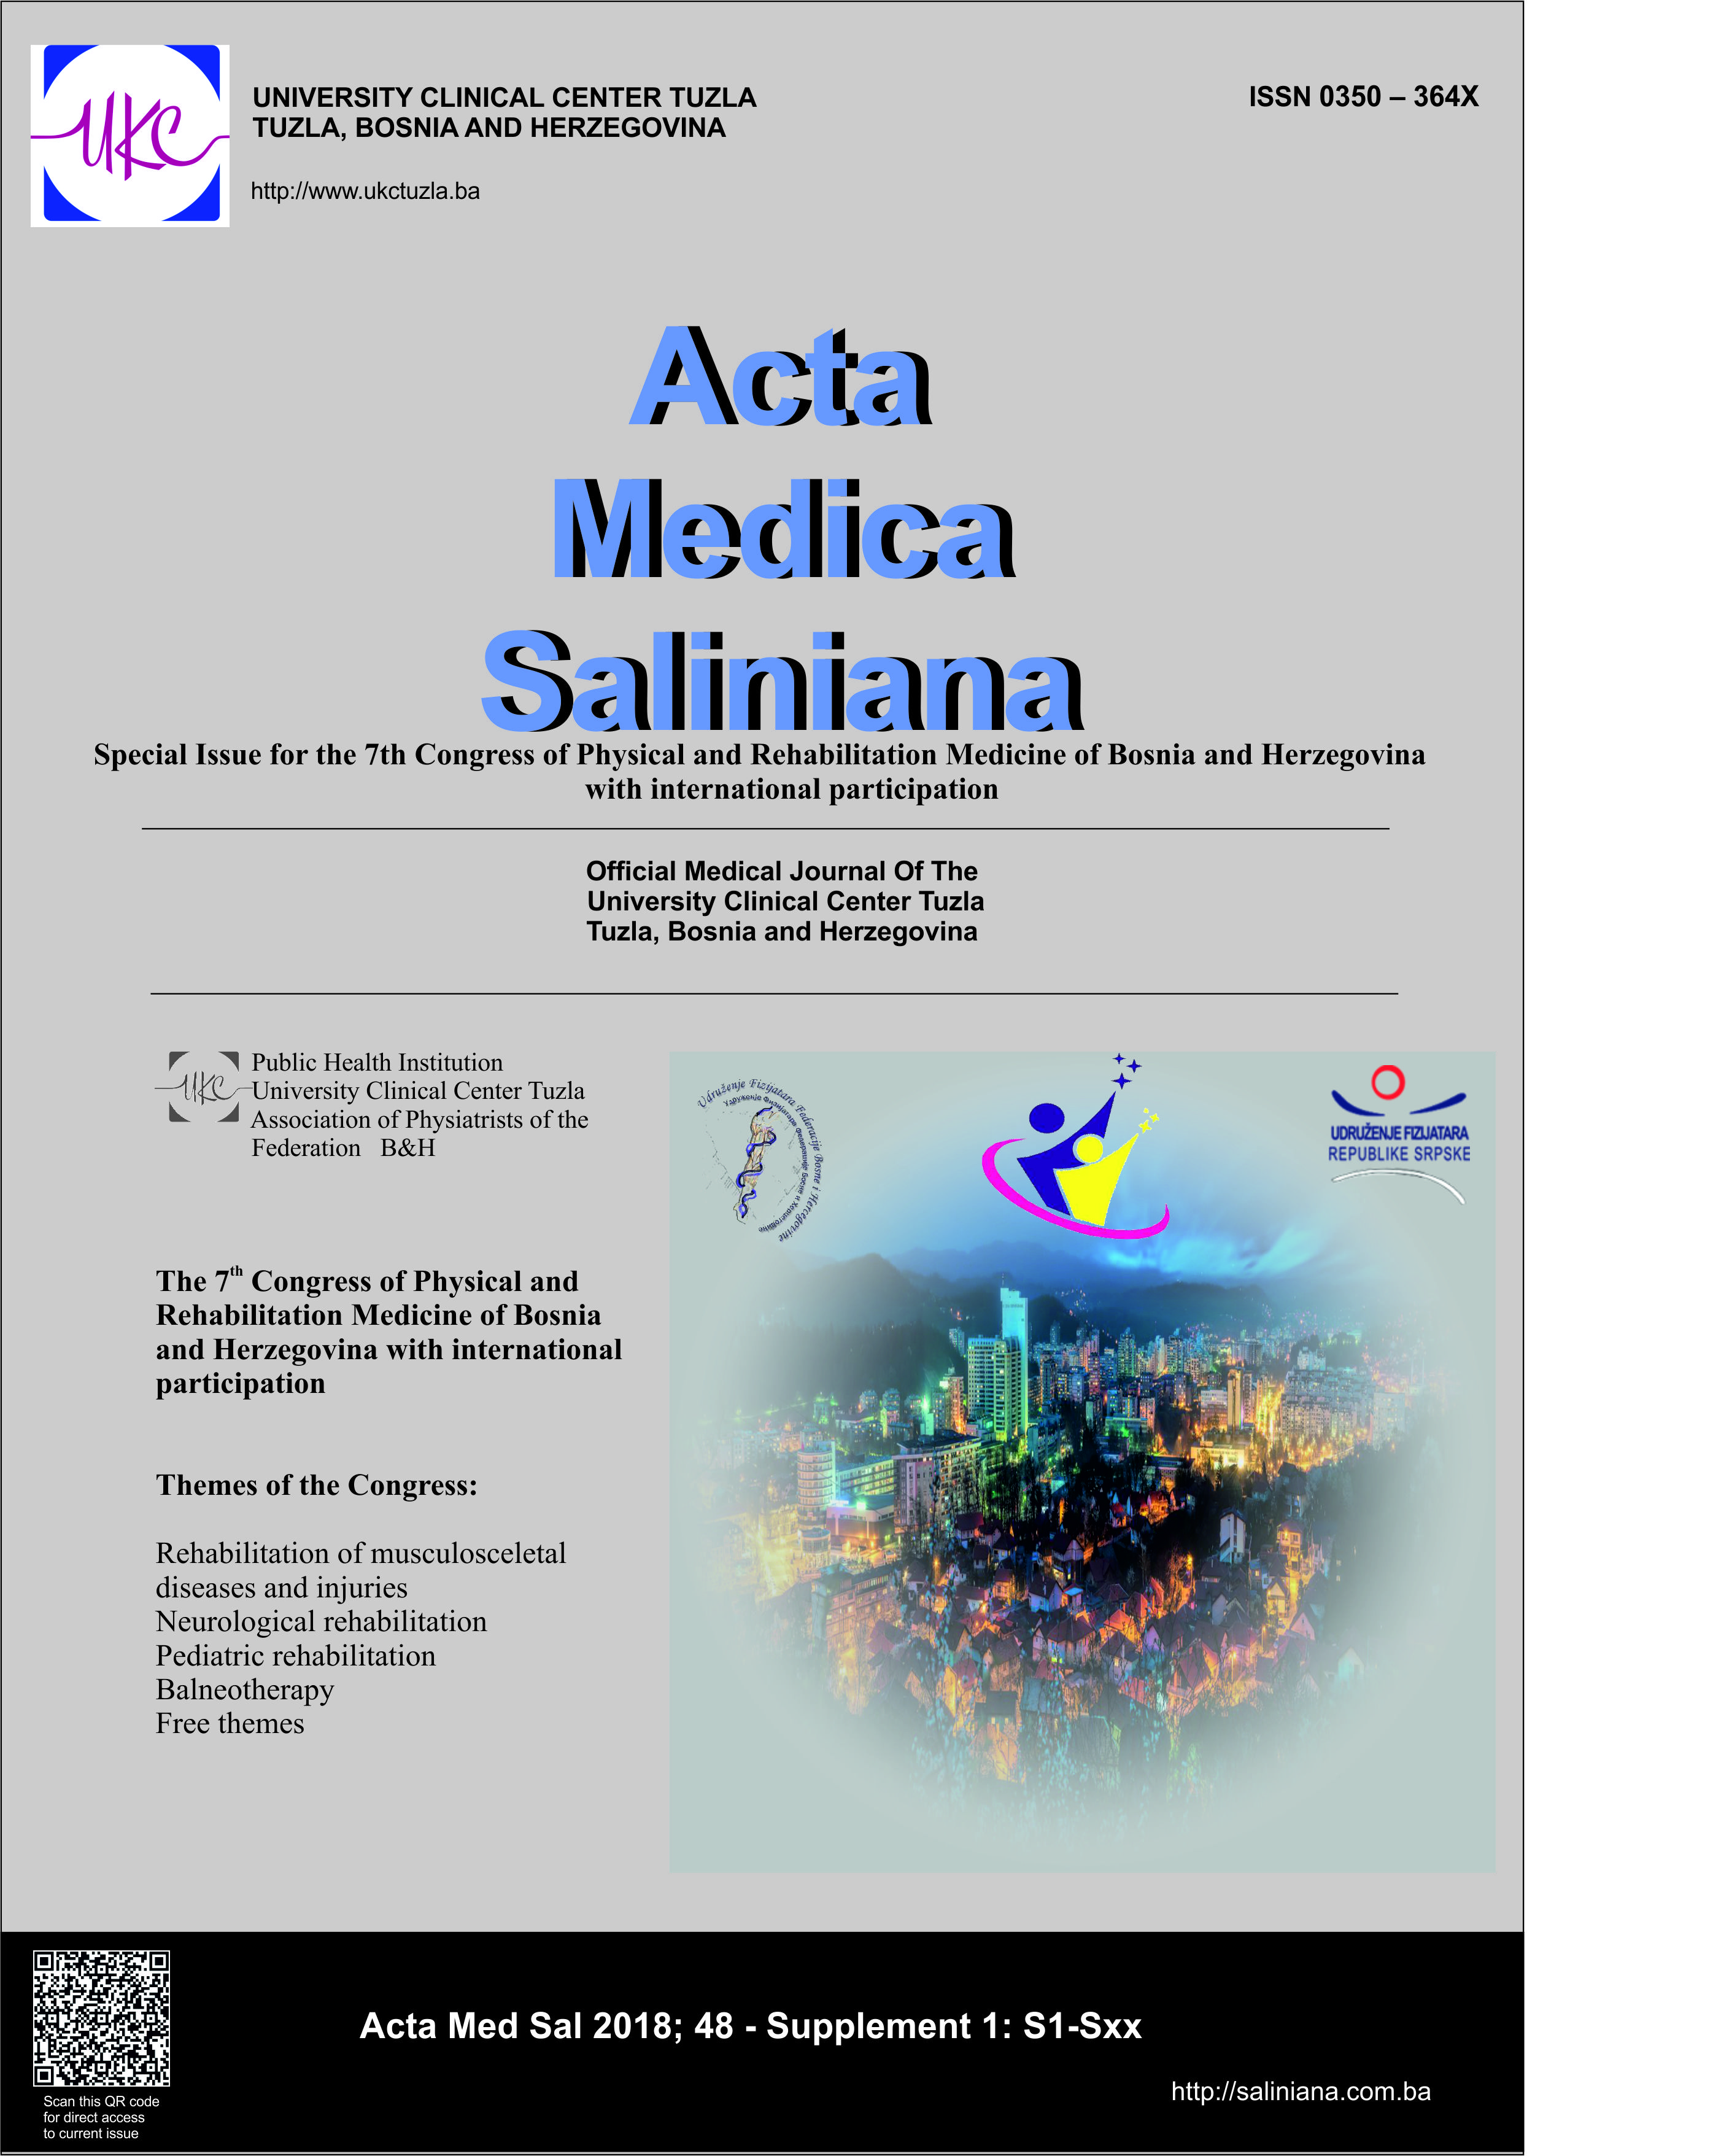 Supplement: Congress of Physical medicine and rehabilitation